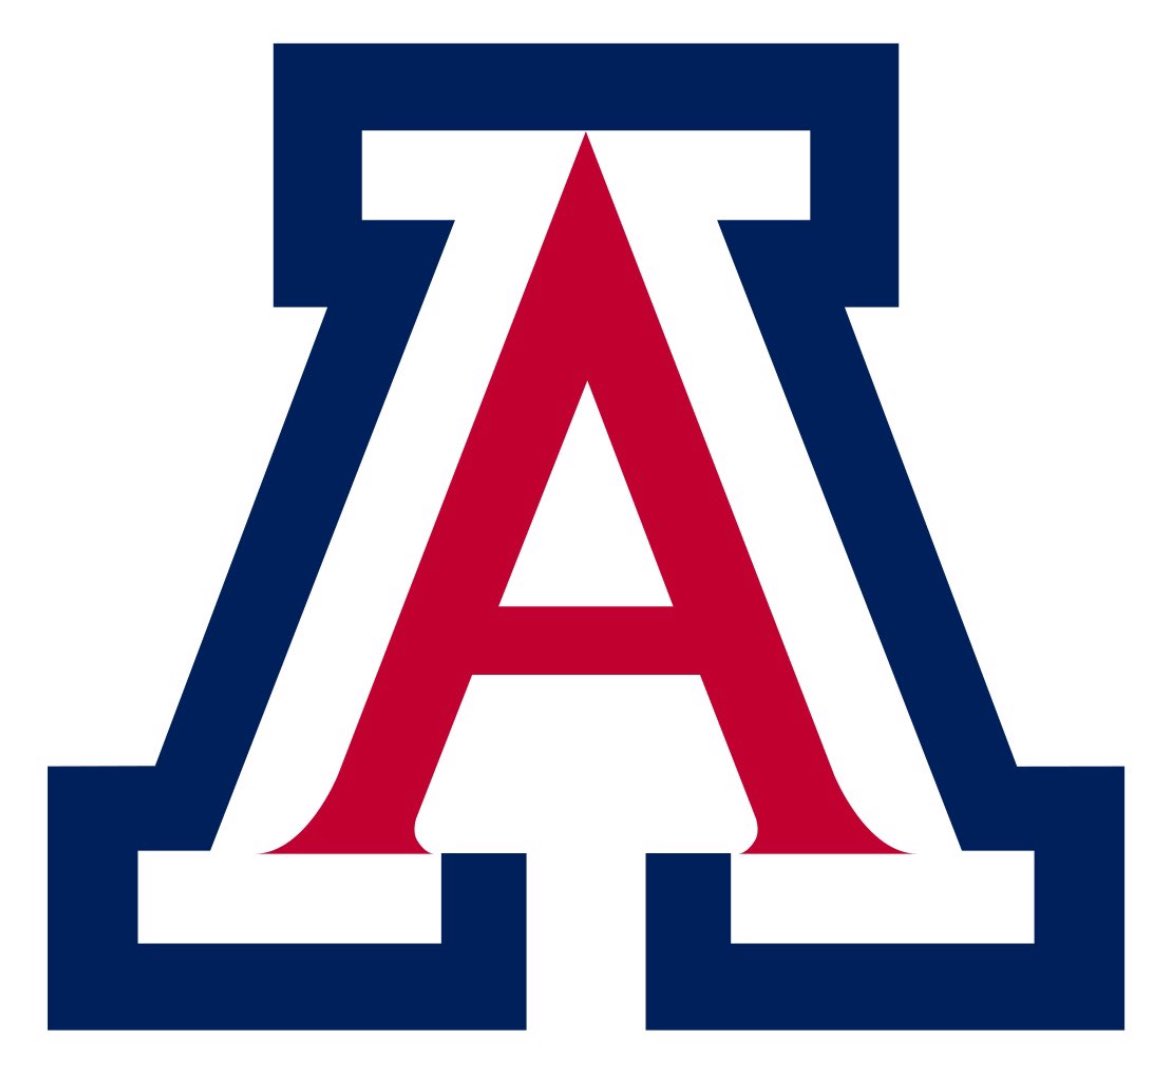 I will be visiting the University of Arizona today, Can’t wait to see their athletics and academics ! @Coach_Ramer @legacyreceivers @chaparralpumafb @RealCoachCarter @alecsimpson5 @coachBSanders18 @GregBiggins